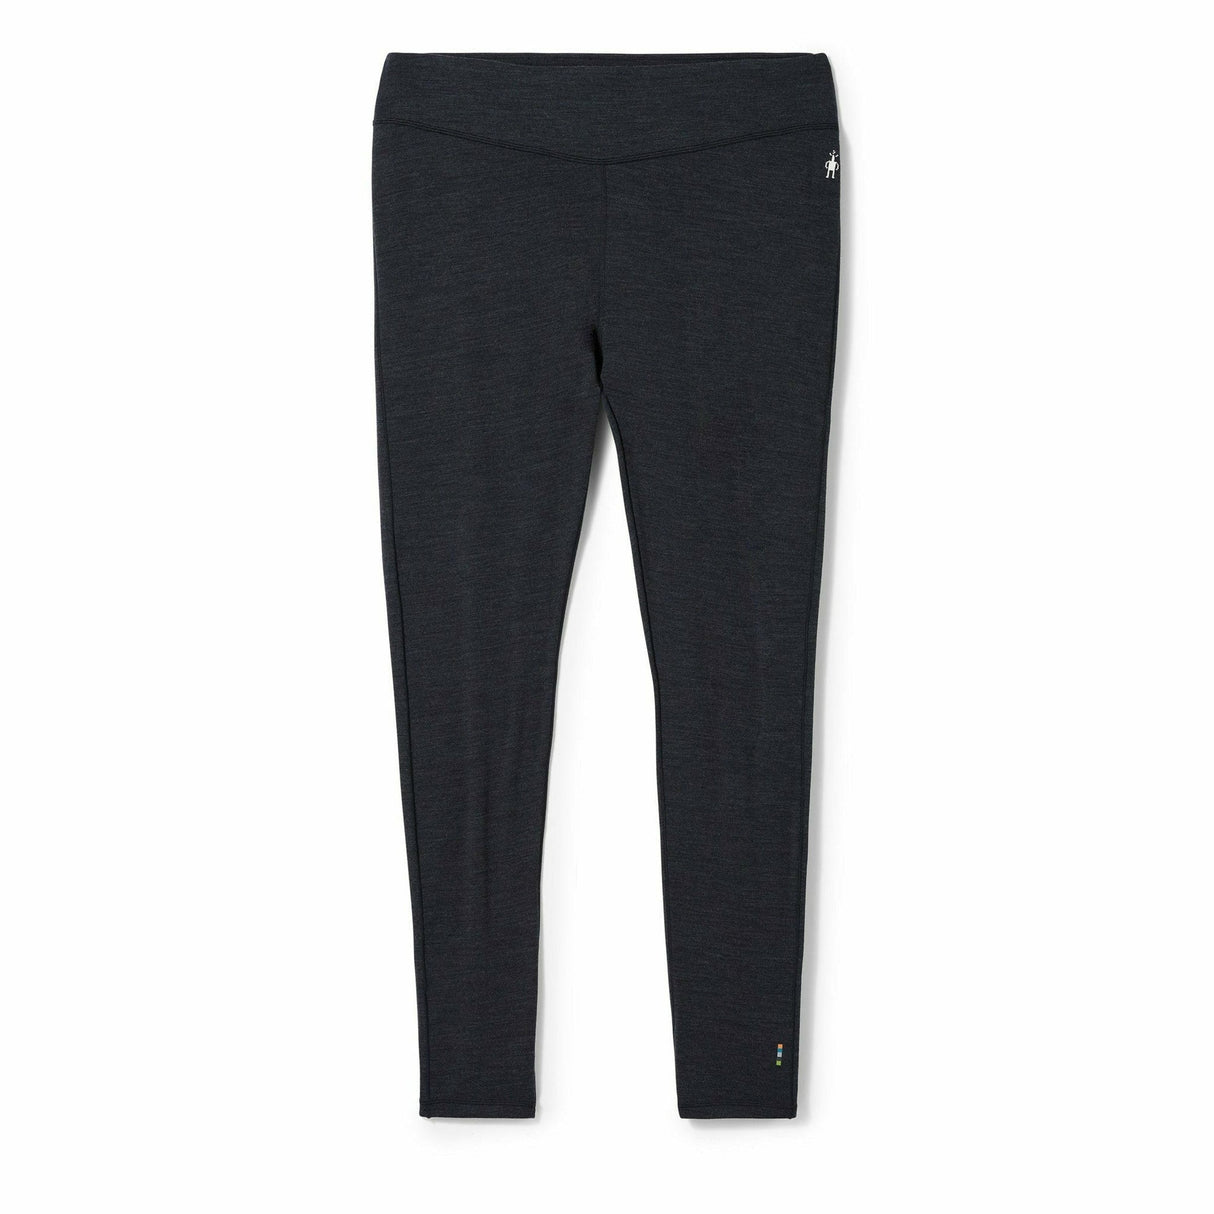 Smartwool Womens Classic Thermal Merino Base Layer Plus Bottoms  -  1X / Charcoal Heather